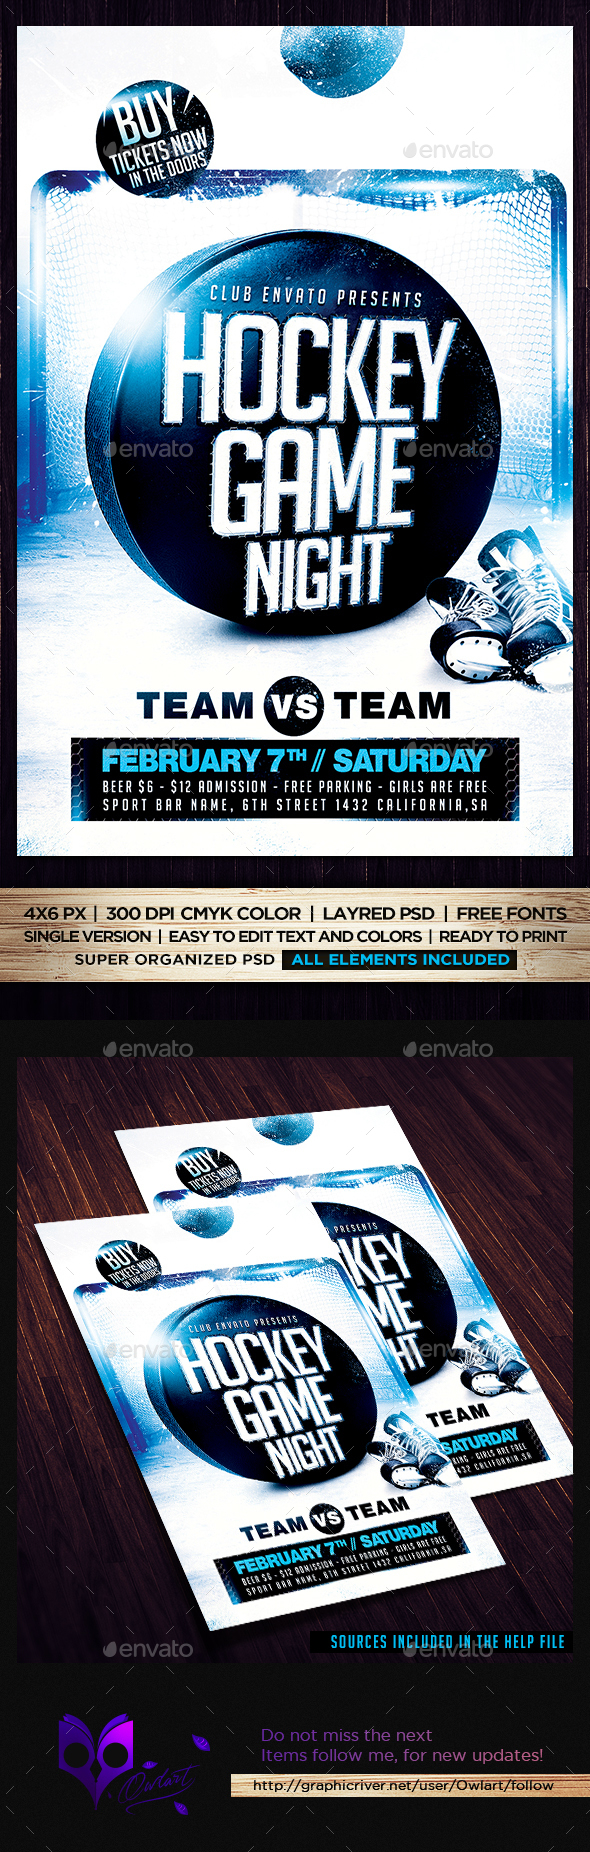 Hockey Flyer Graphics, Designs & Templates From Graphicriver Throughout Hockey Flyer Template